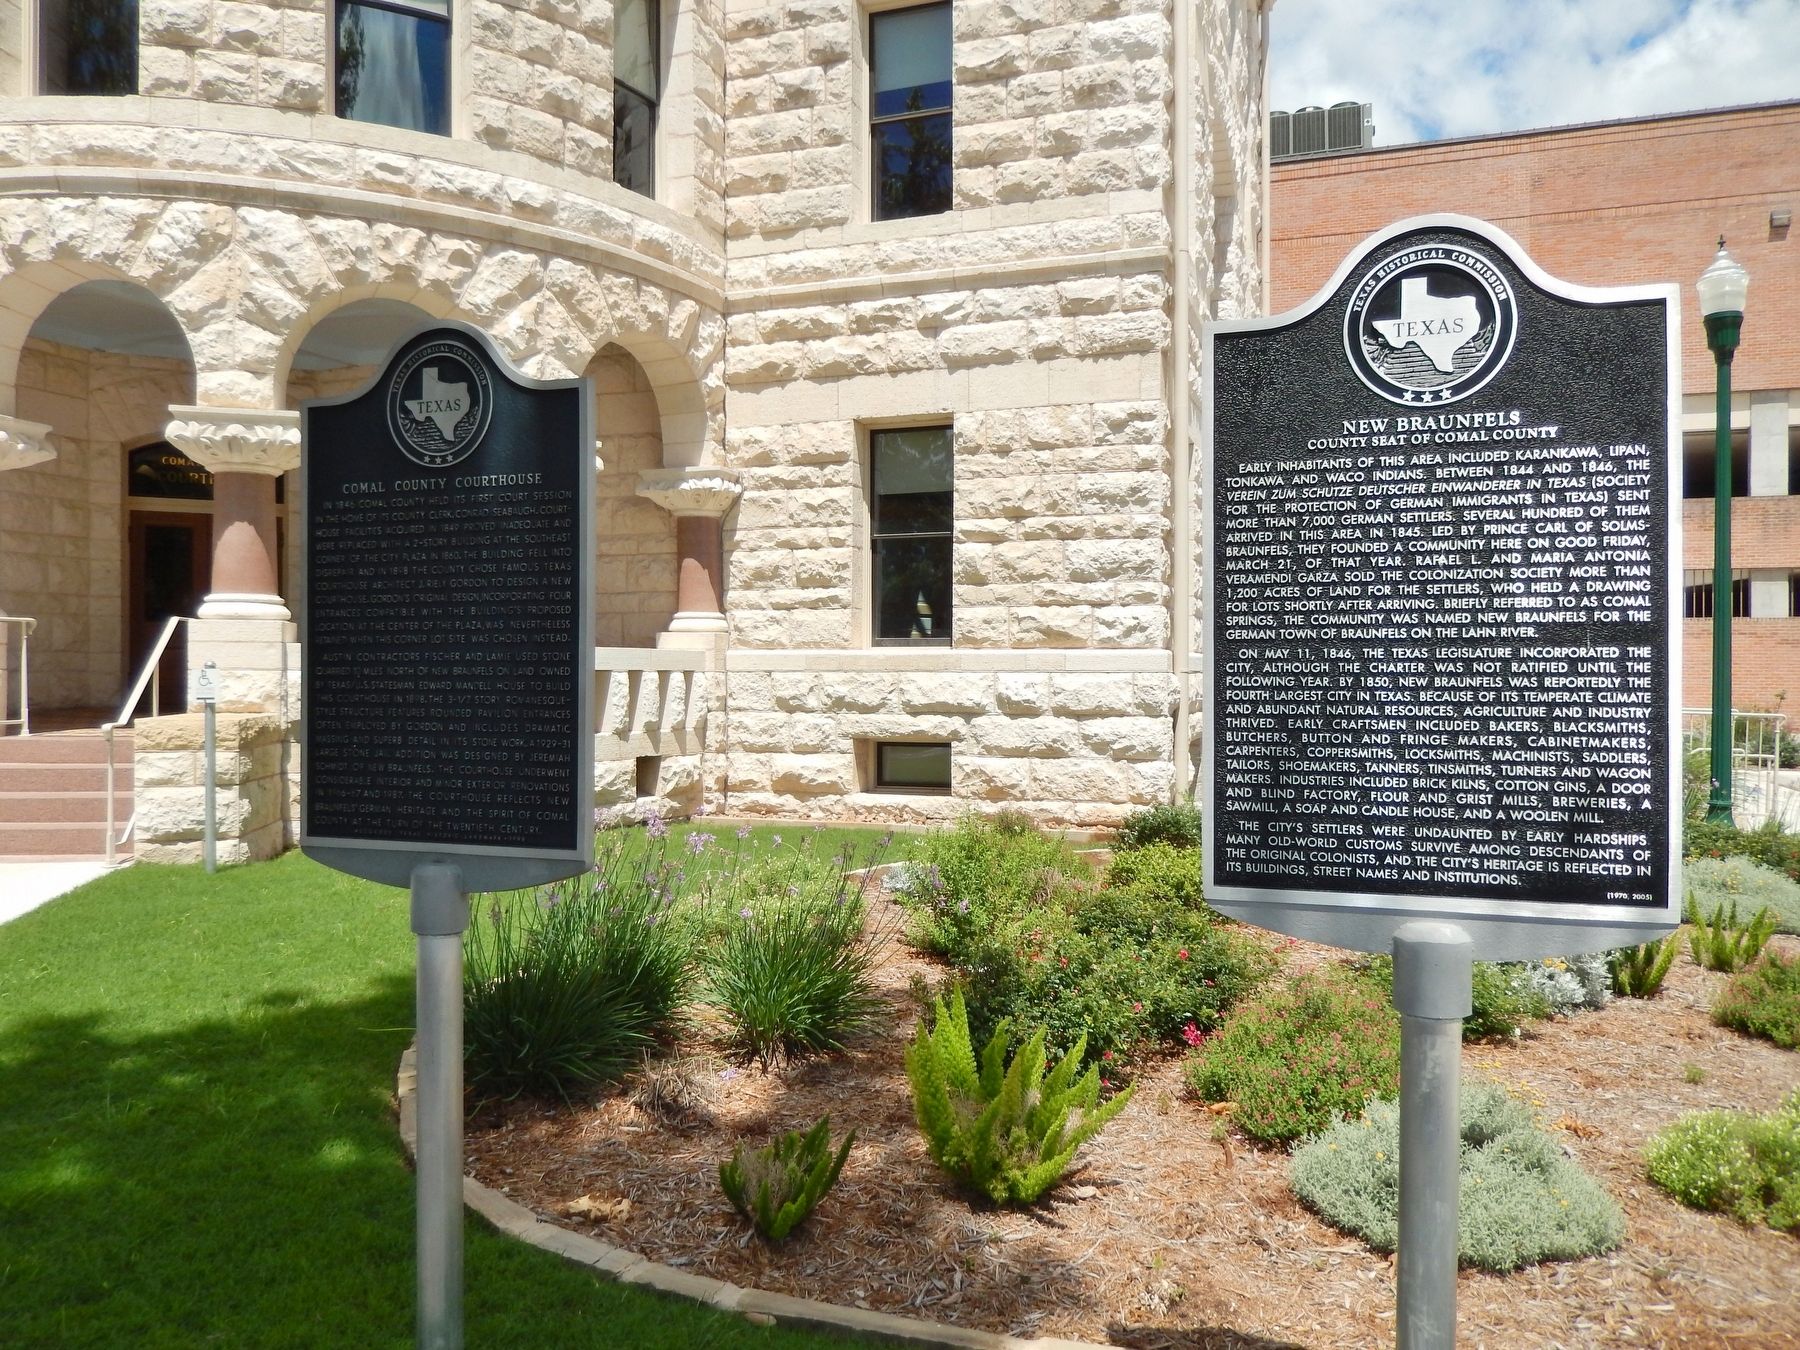 New Braunfels Marker (<i>wide view showing adjacent marker and courthouse in background</i>) image. Click for full size.